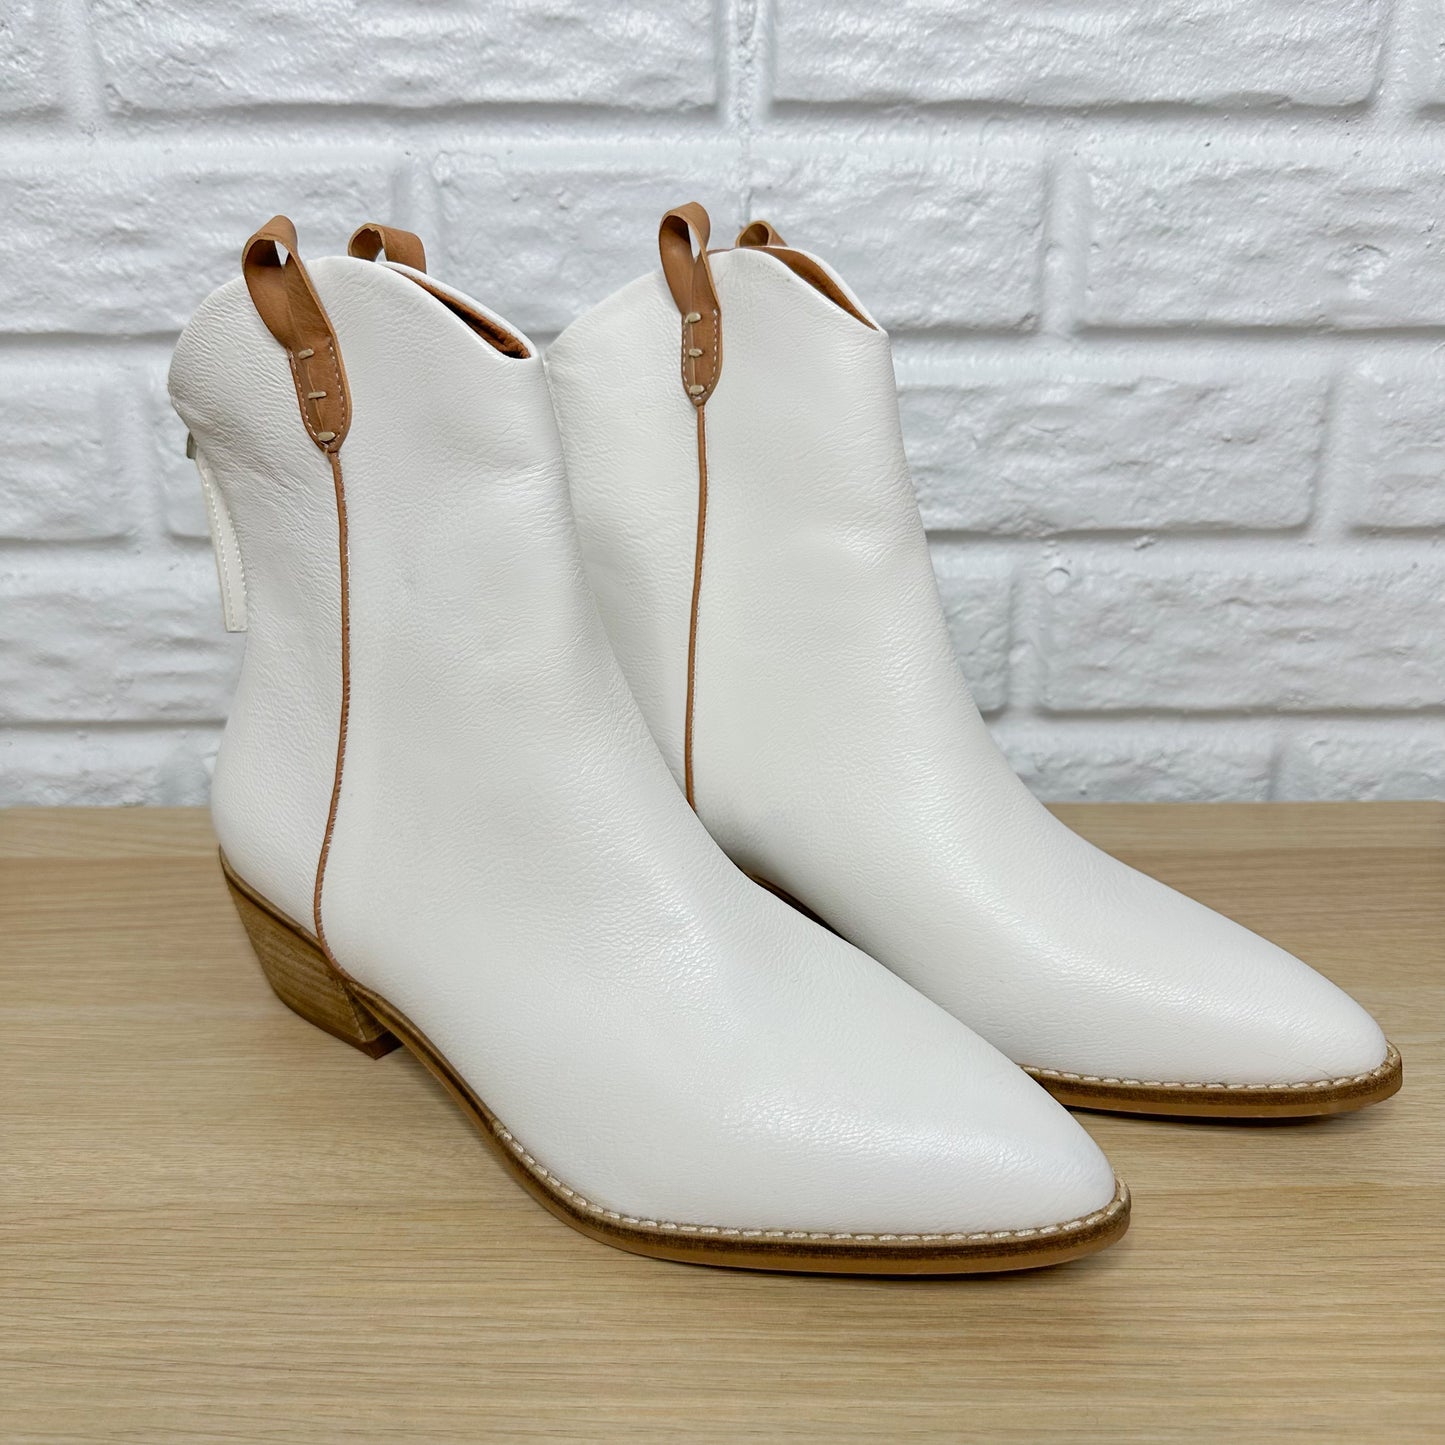 Beast Fashion White Pointed Toe Ankle Booties Size 10